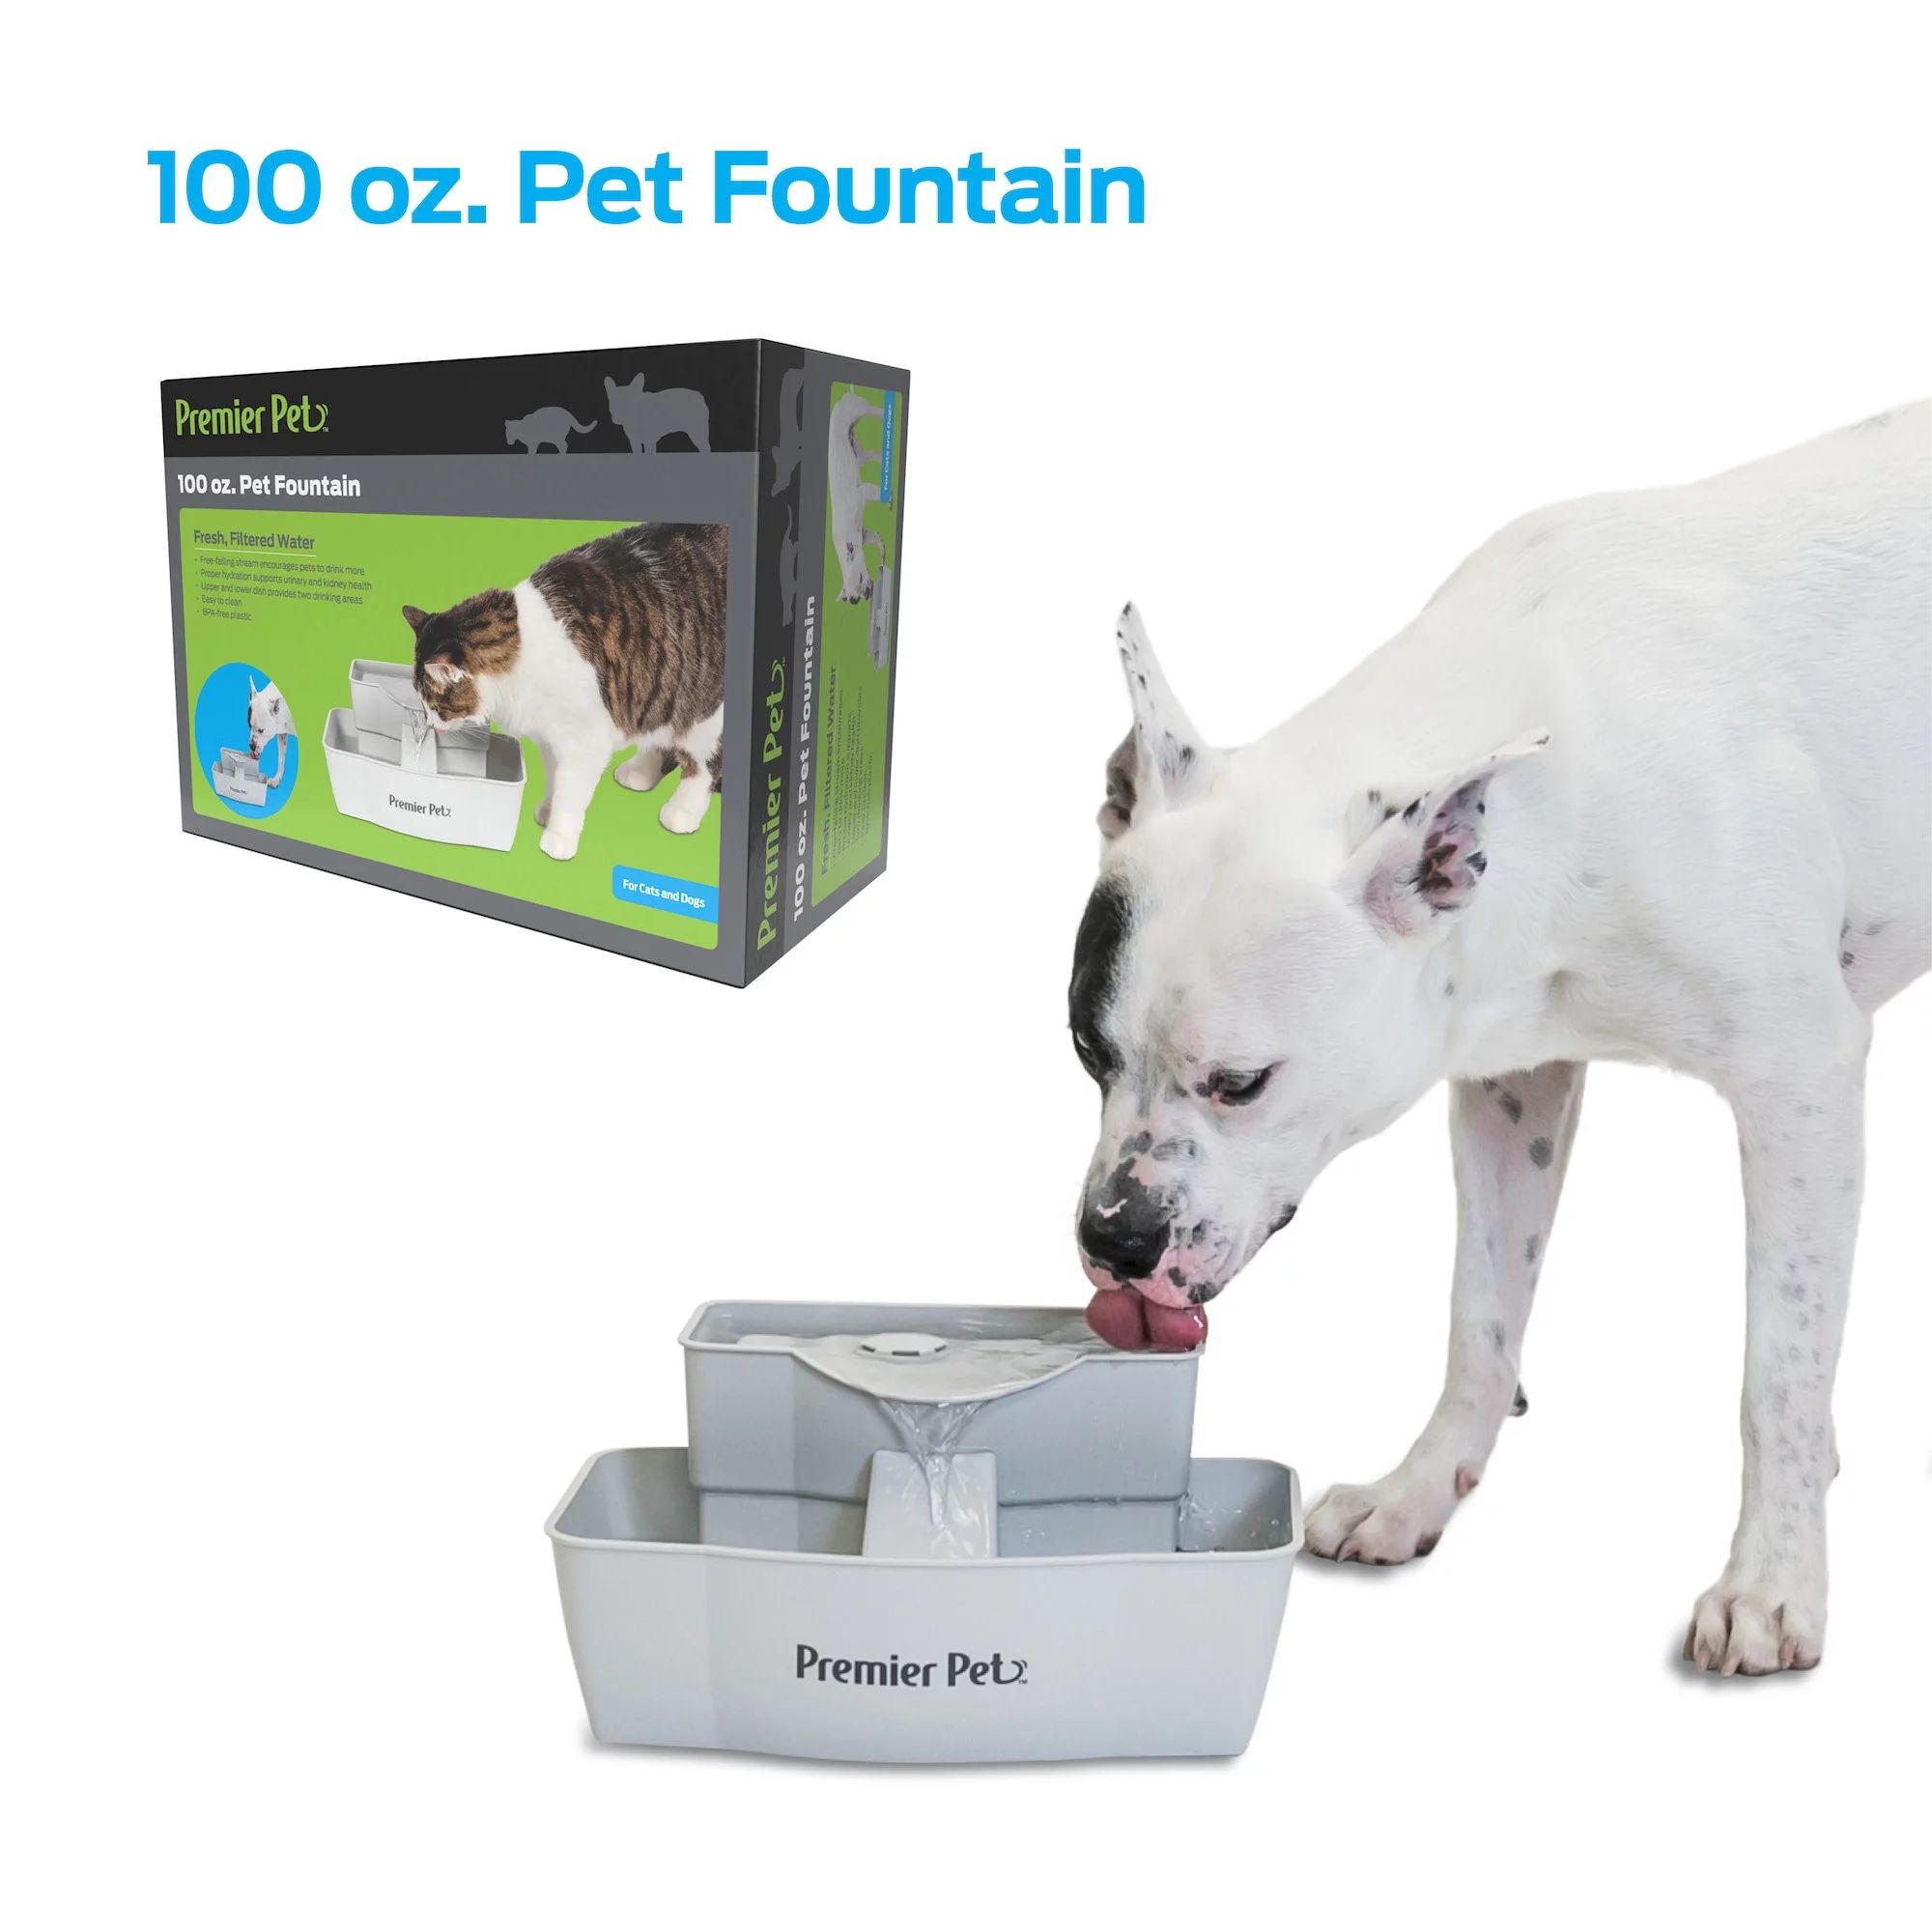 Premier Pet 100 oz. Pet Fountain - Automatic Water Fountain for Dogs and Cats | Walmart (US)